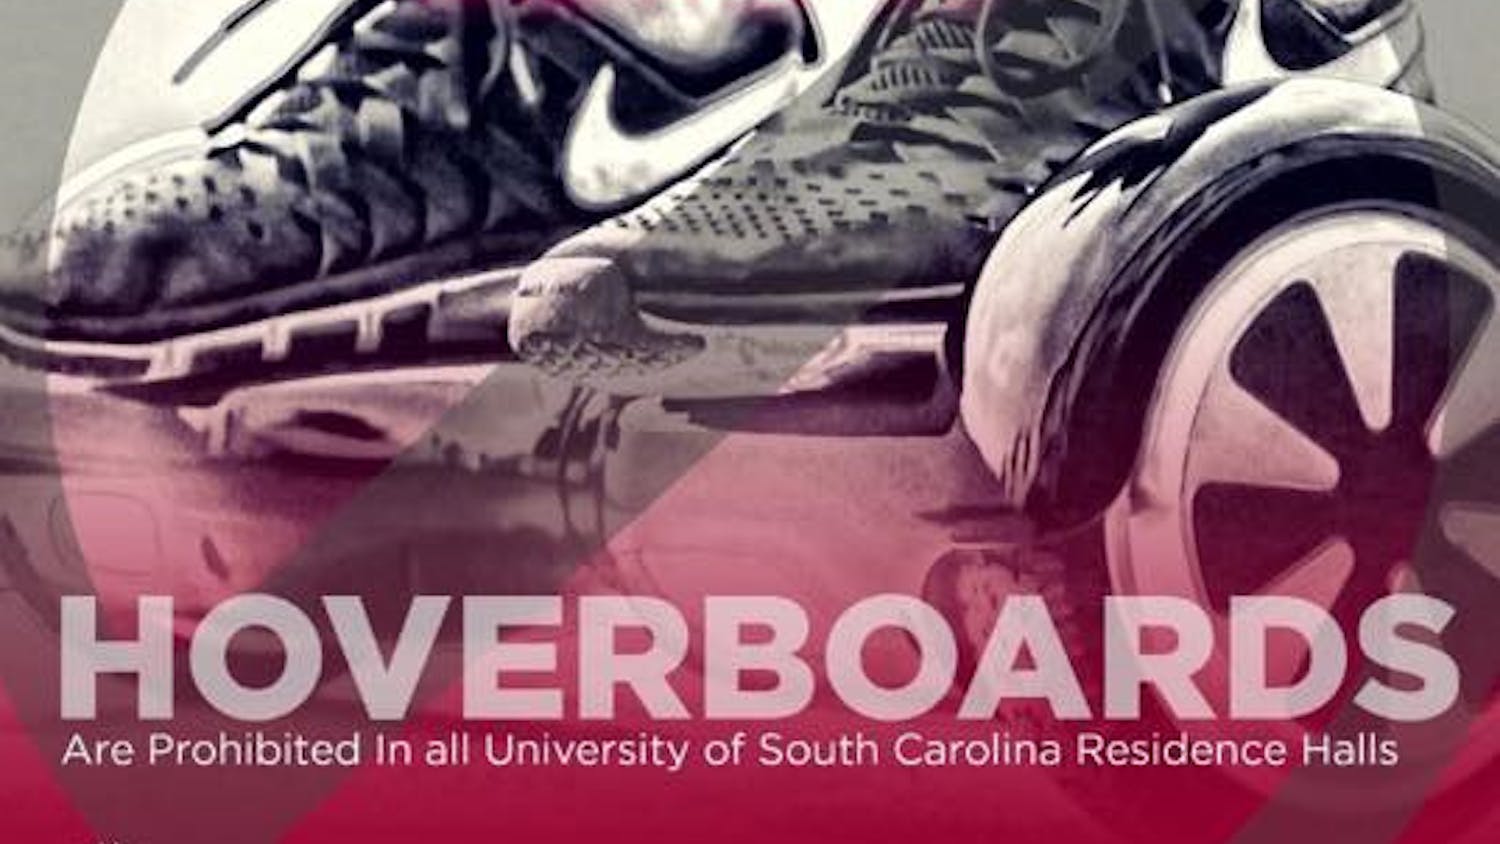 @UofSCHousing- Hoverboards, have been banned from all university residence halls.